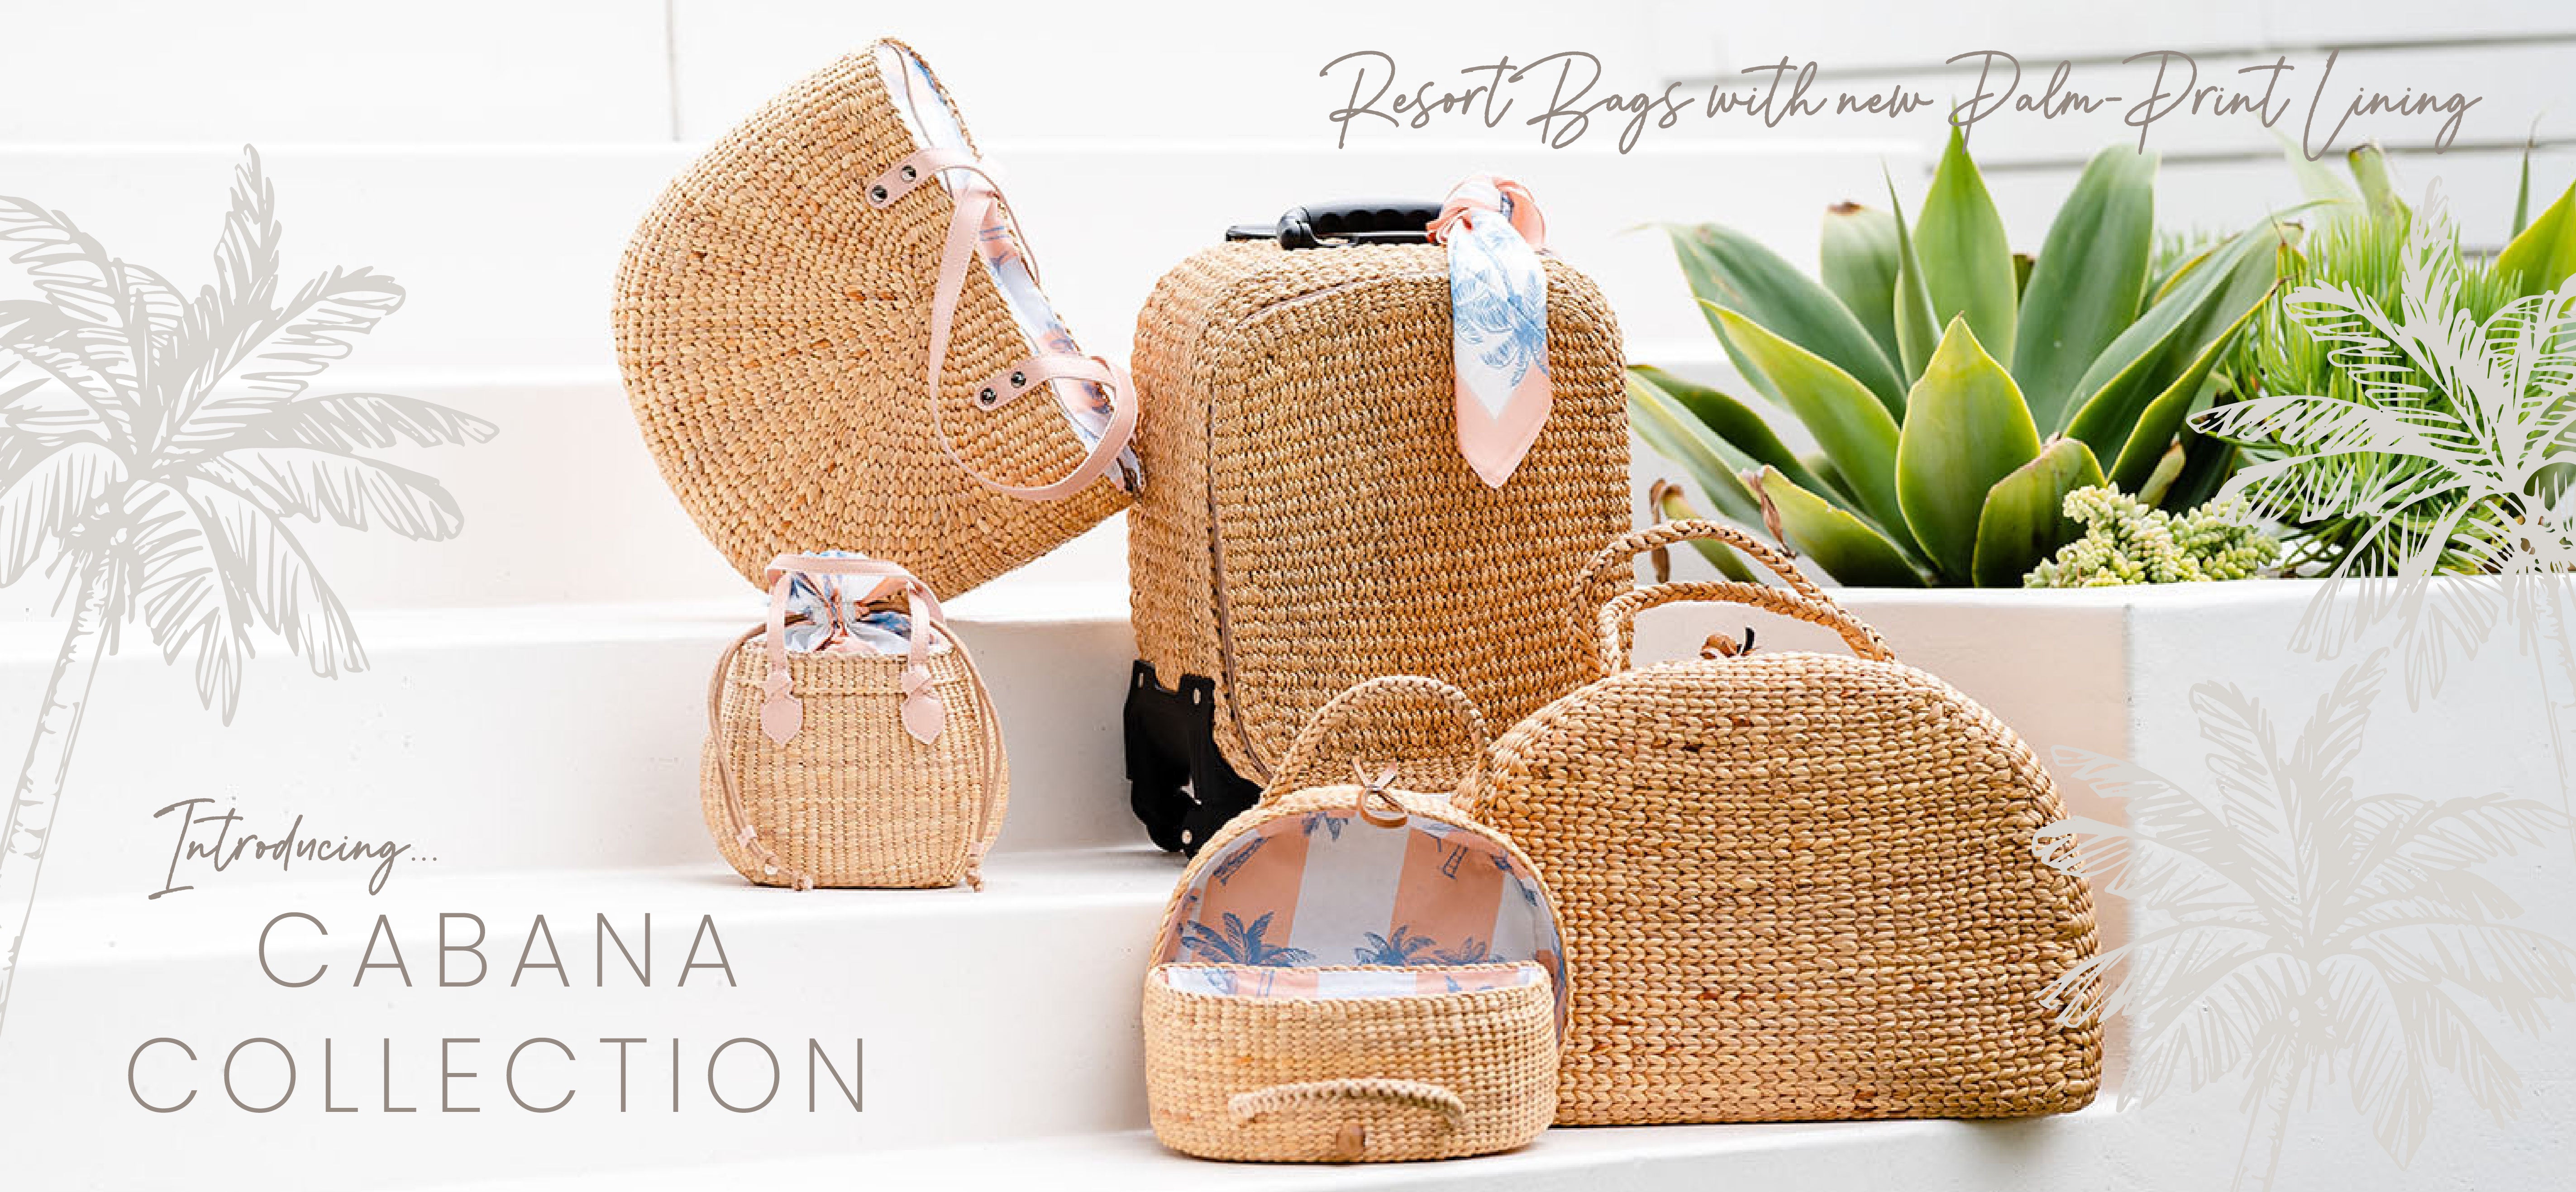 Sea & Grass: Handwoven straw bags and totes for women and children